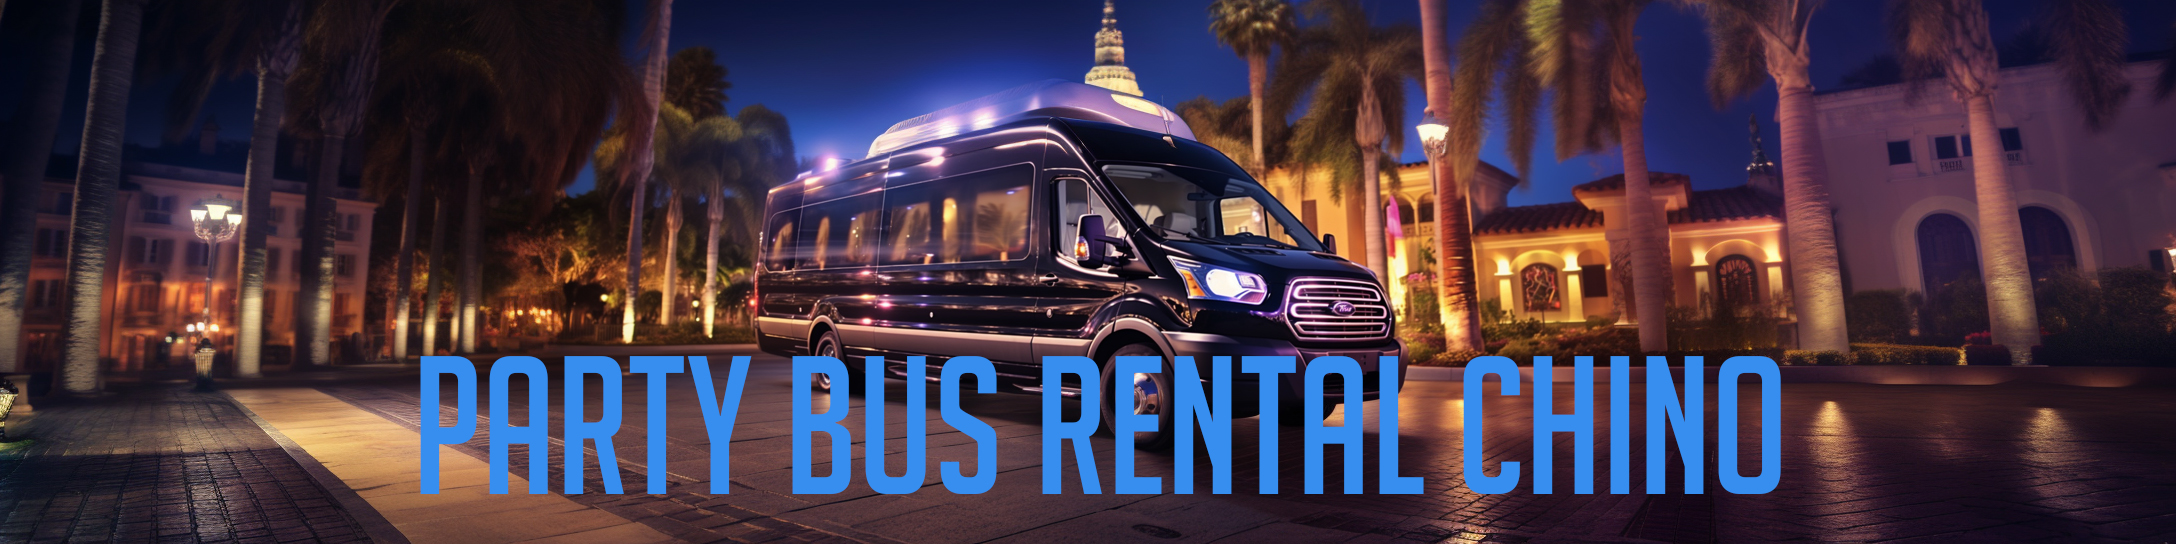 Party Bus Rental Chino